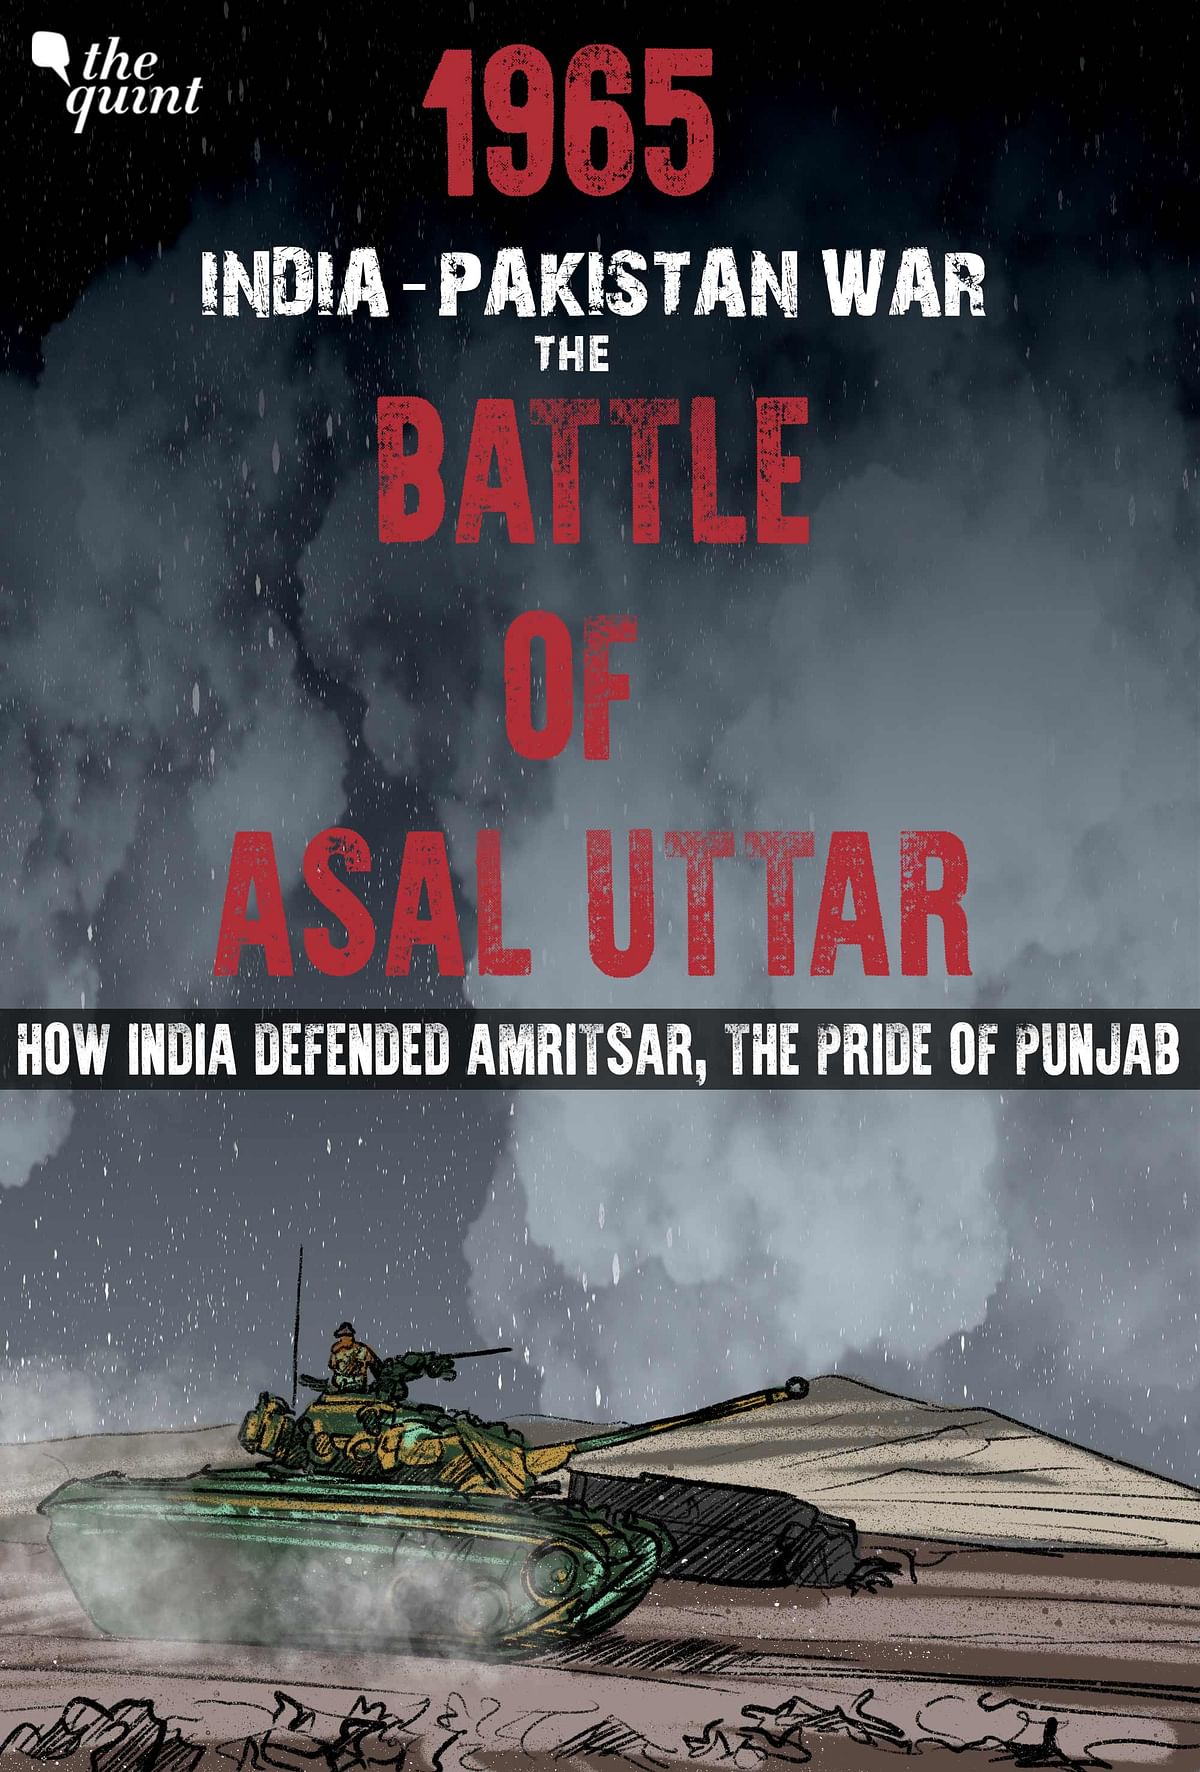 The battle of Asal Uttar changed the course of the 1965 war in India's favour.